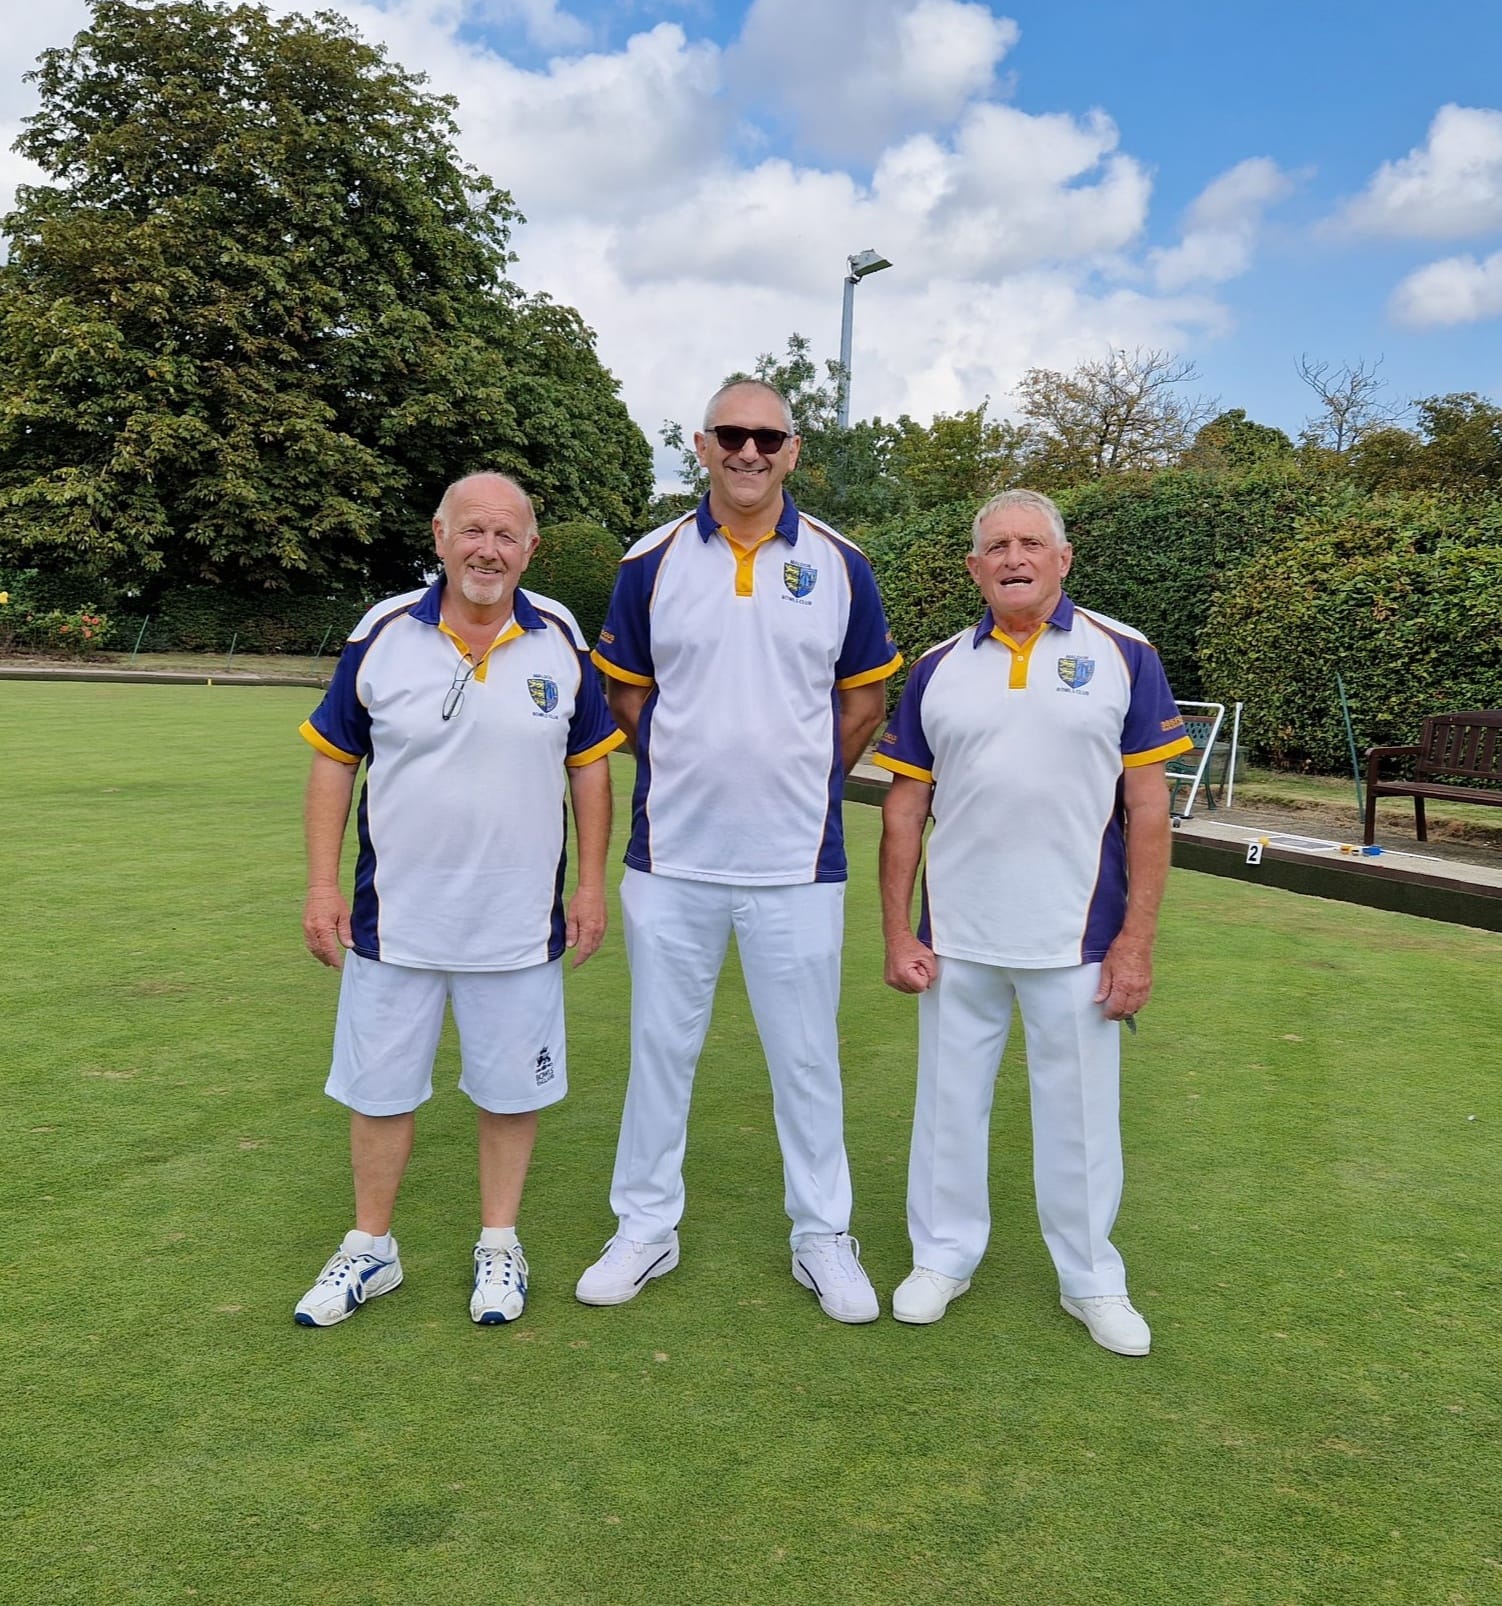 Winners of the Triples, Steve Morrison, Geoff Cox and Richard Beckwith